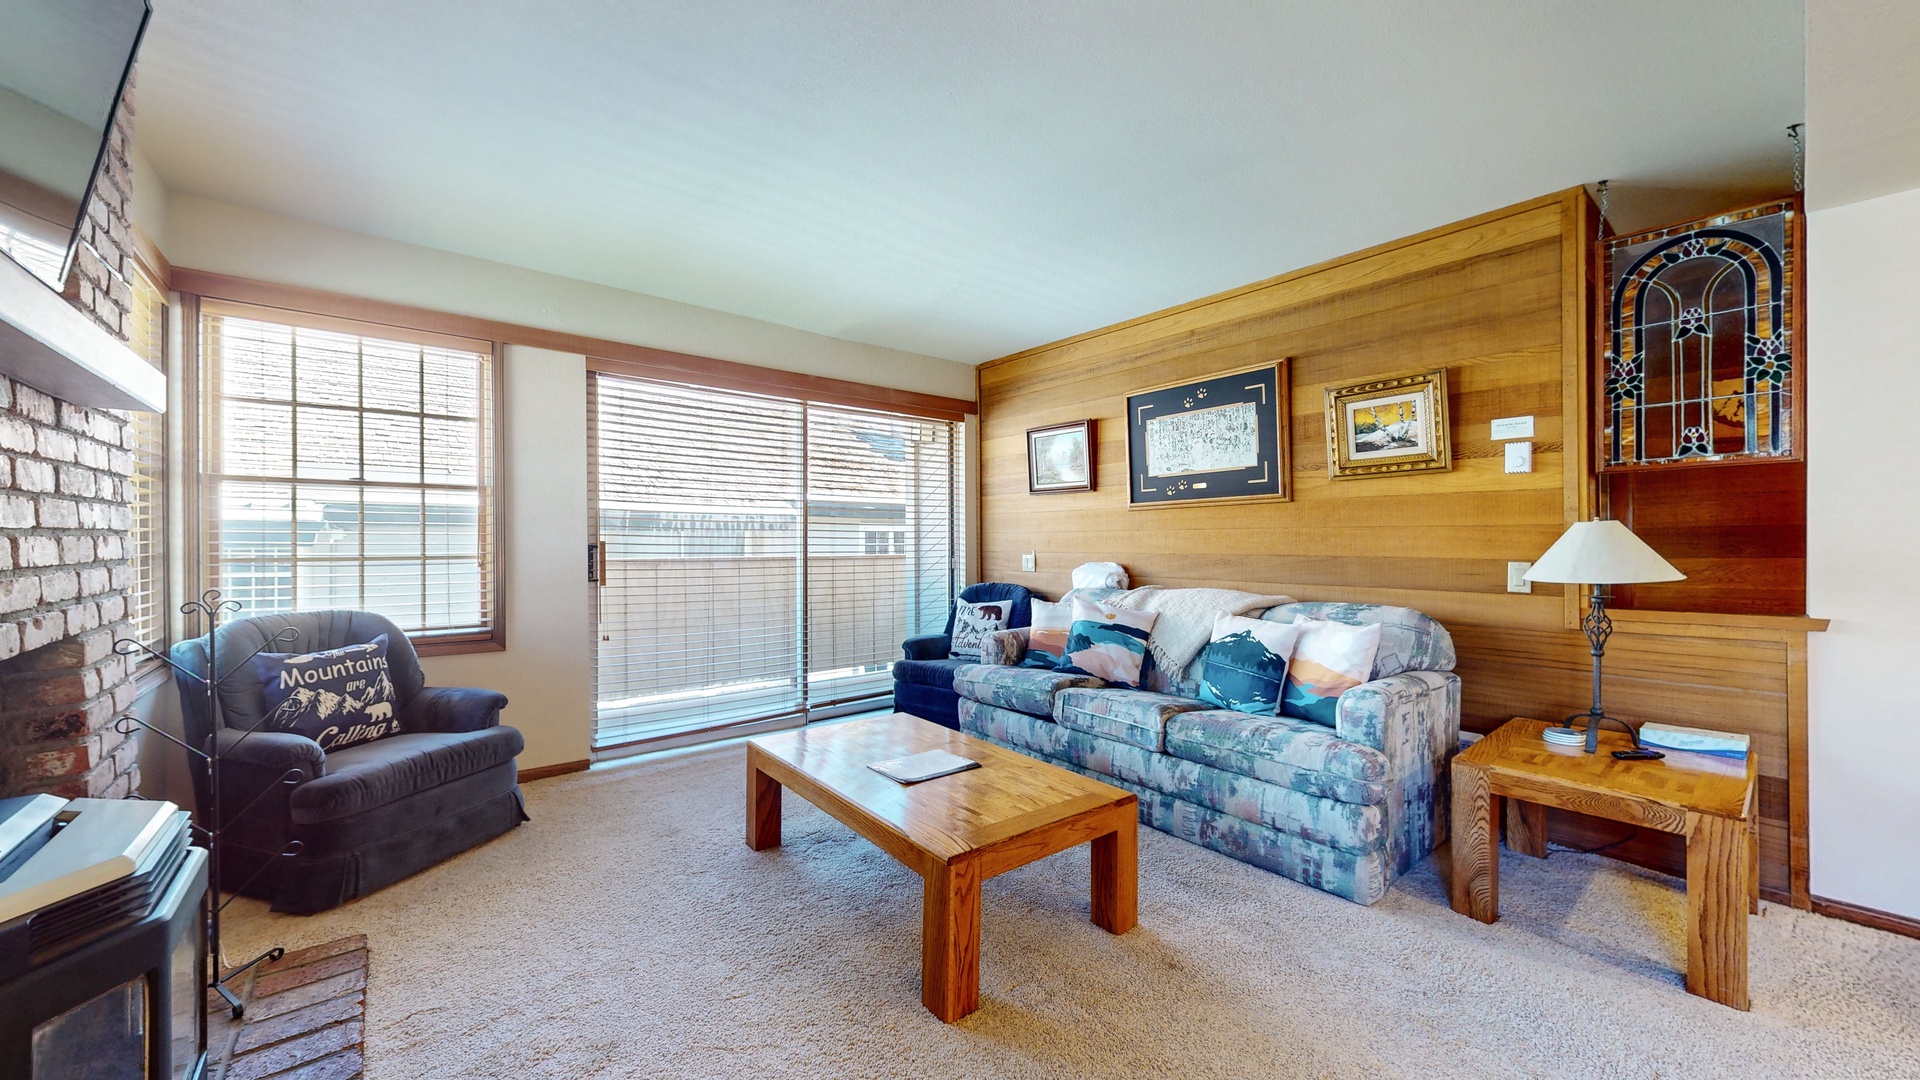 The living room provides ample seating, sofa sleeper, Smart TV, and access to the balcony